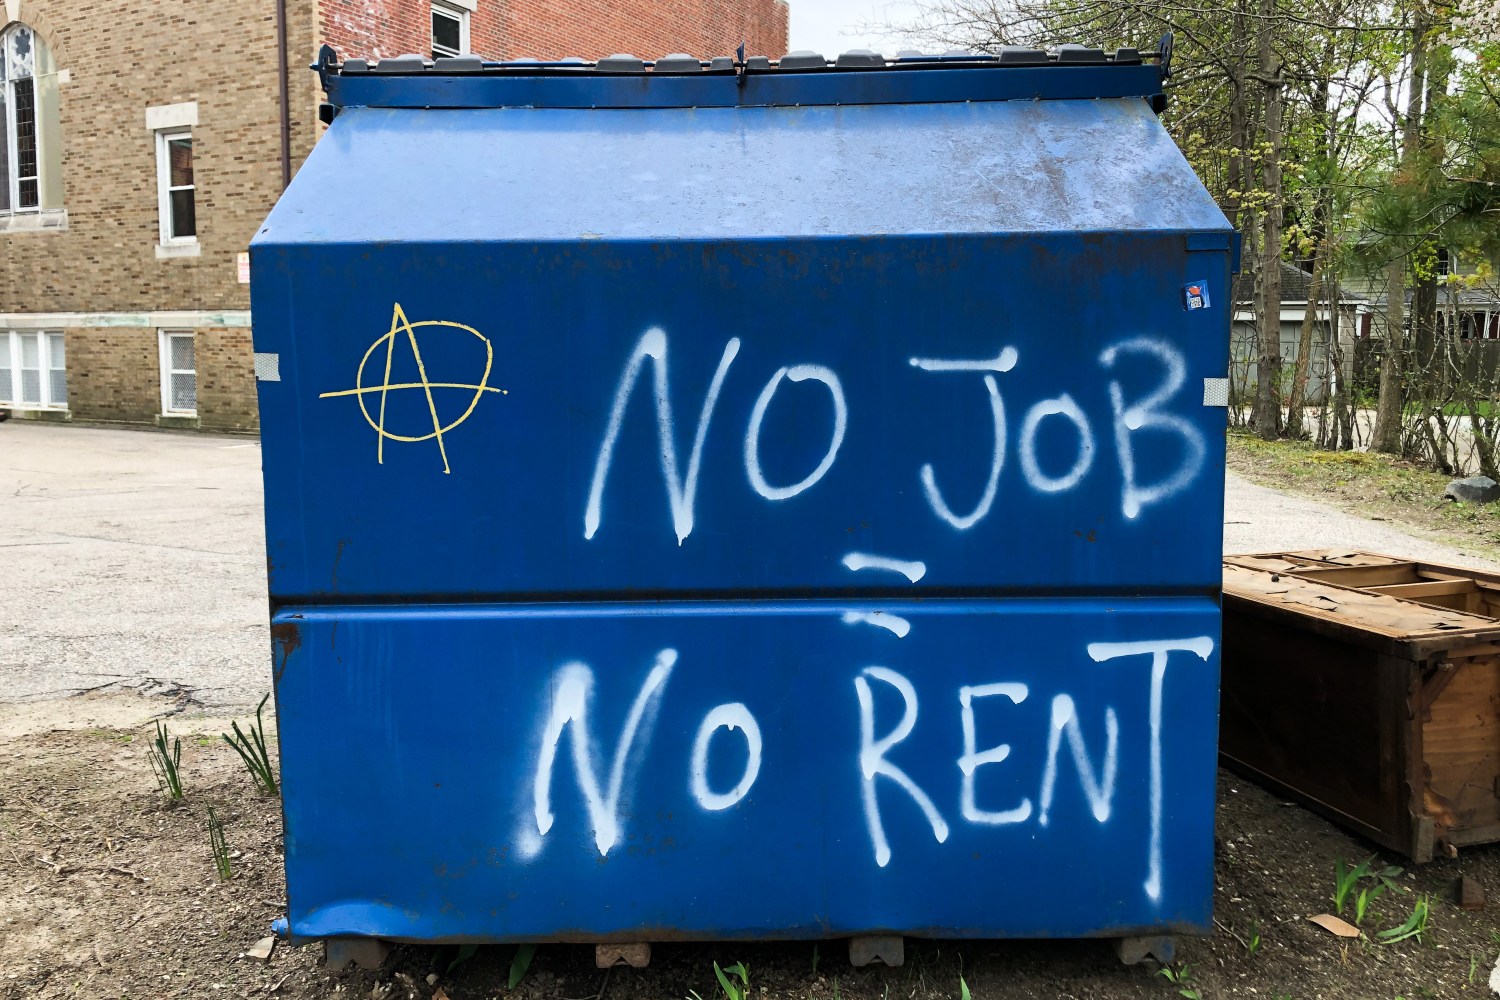 A garbage dumpster is painted with 'No Job No Rent' and the anarchy symbol in Providence, Rhode Island on May 4 2020. (Photo by Samuel Rigelhaupt / Sipa USA)No Use UK. No Use Germany.